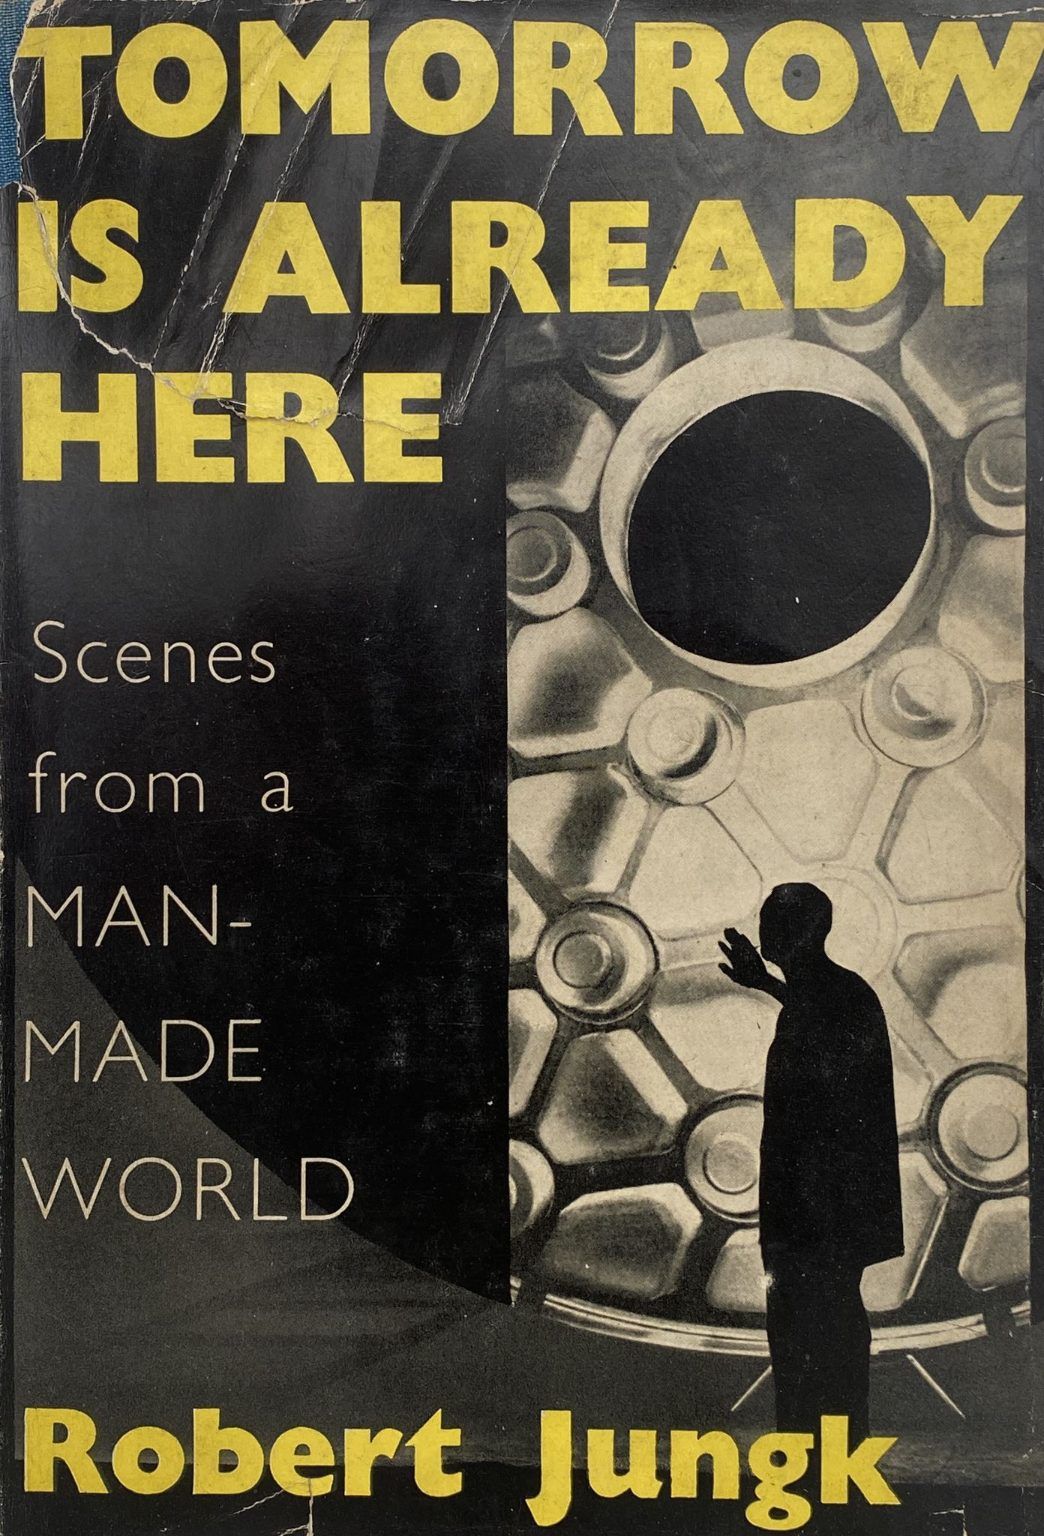 TOMORROW IS ALREADY HERE: Scenes from a Made-Made World